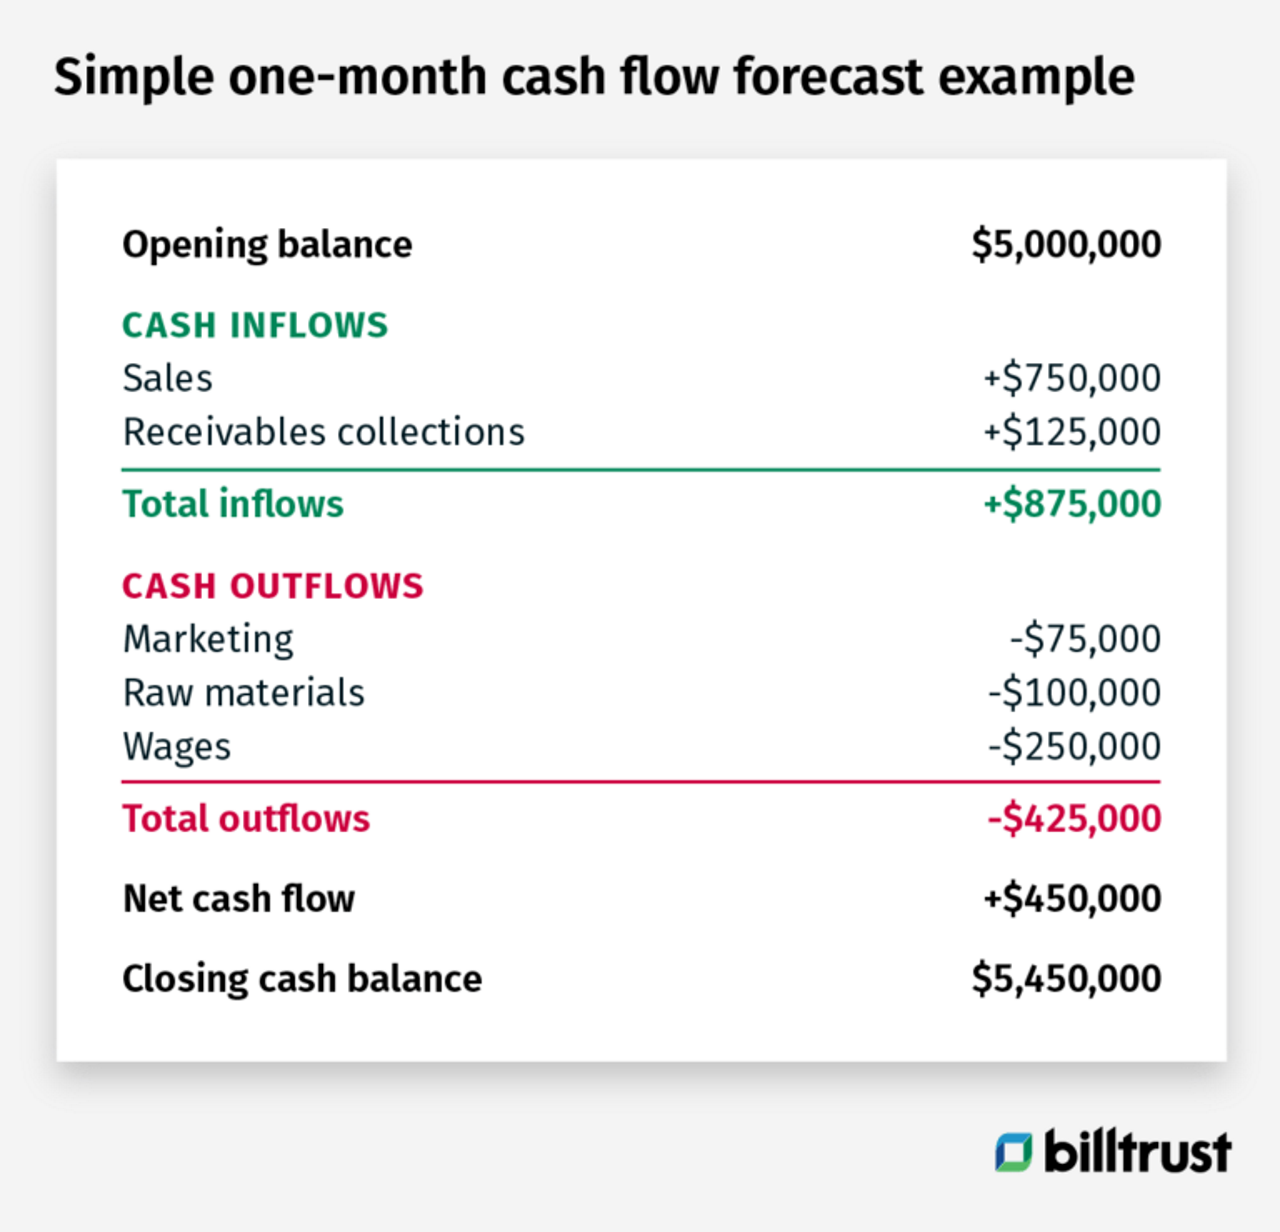 simple one-month cash flow forecast example